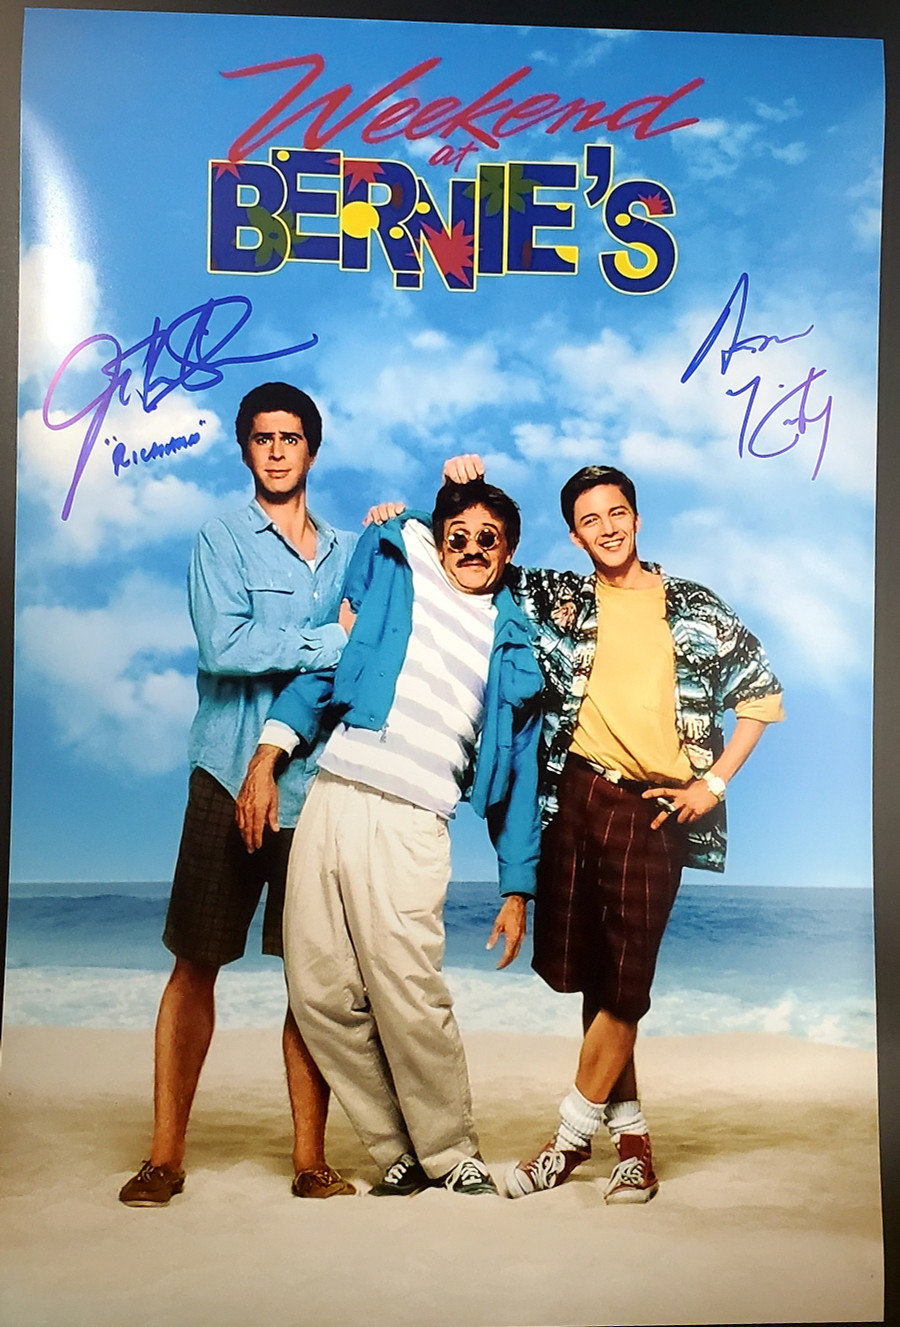 Weekend at Bernies Autographed 12x18 Mini Poster